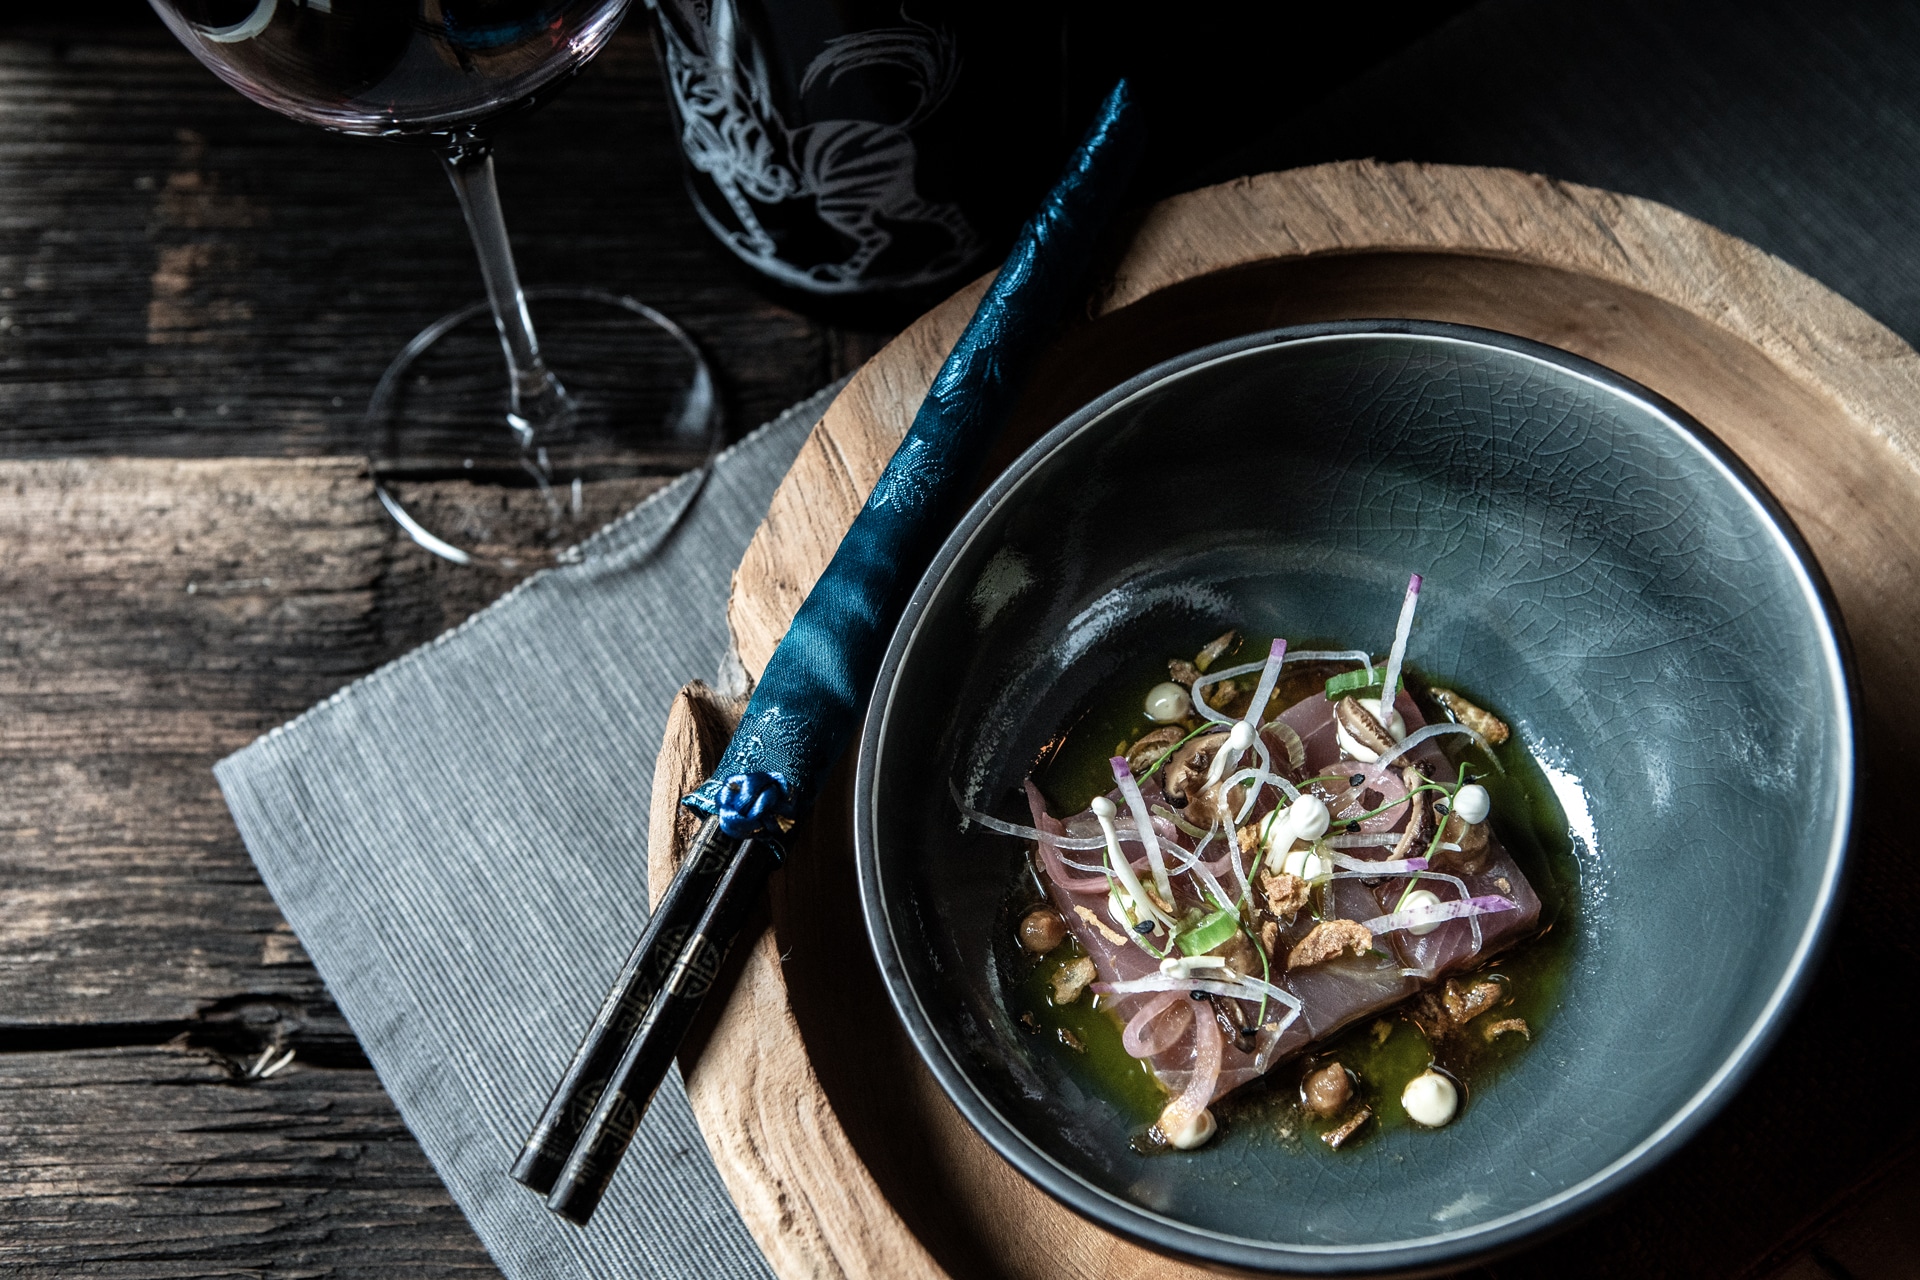 Elegant fine dining presentation with an artistic dish of delicately arranged sashimi served in a dark bowl, complemented by a pair of blue chopsticks on a wooden rest, all set on a rustic wooden table beside a glass of red wine.